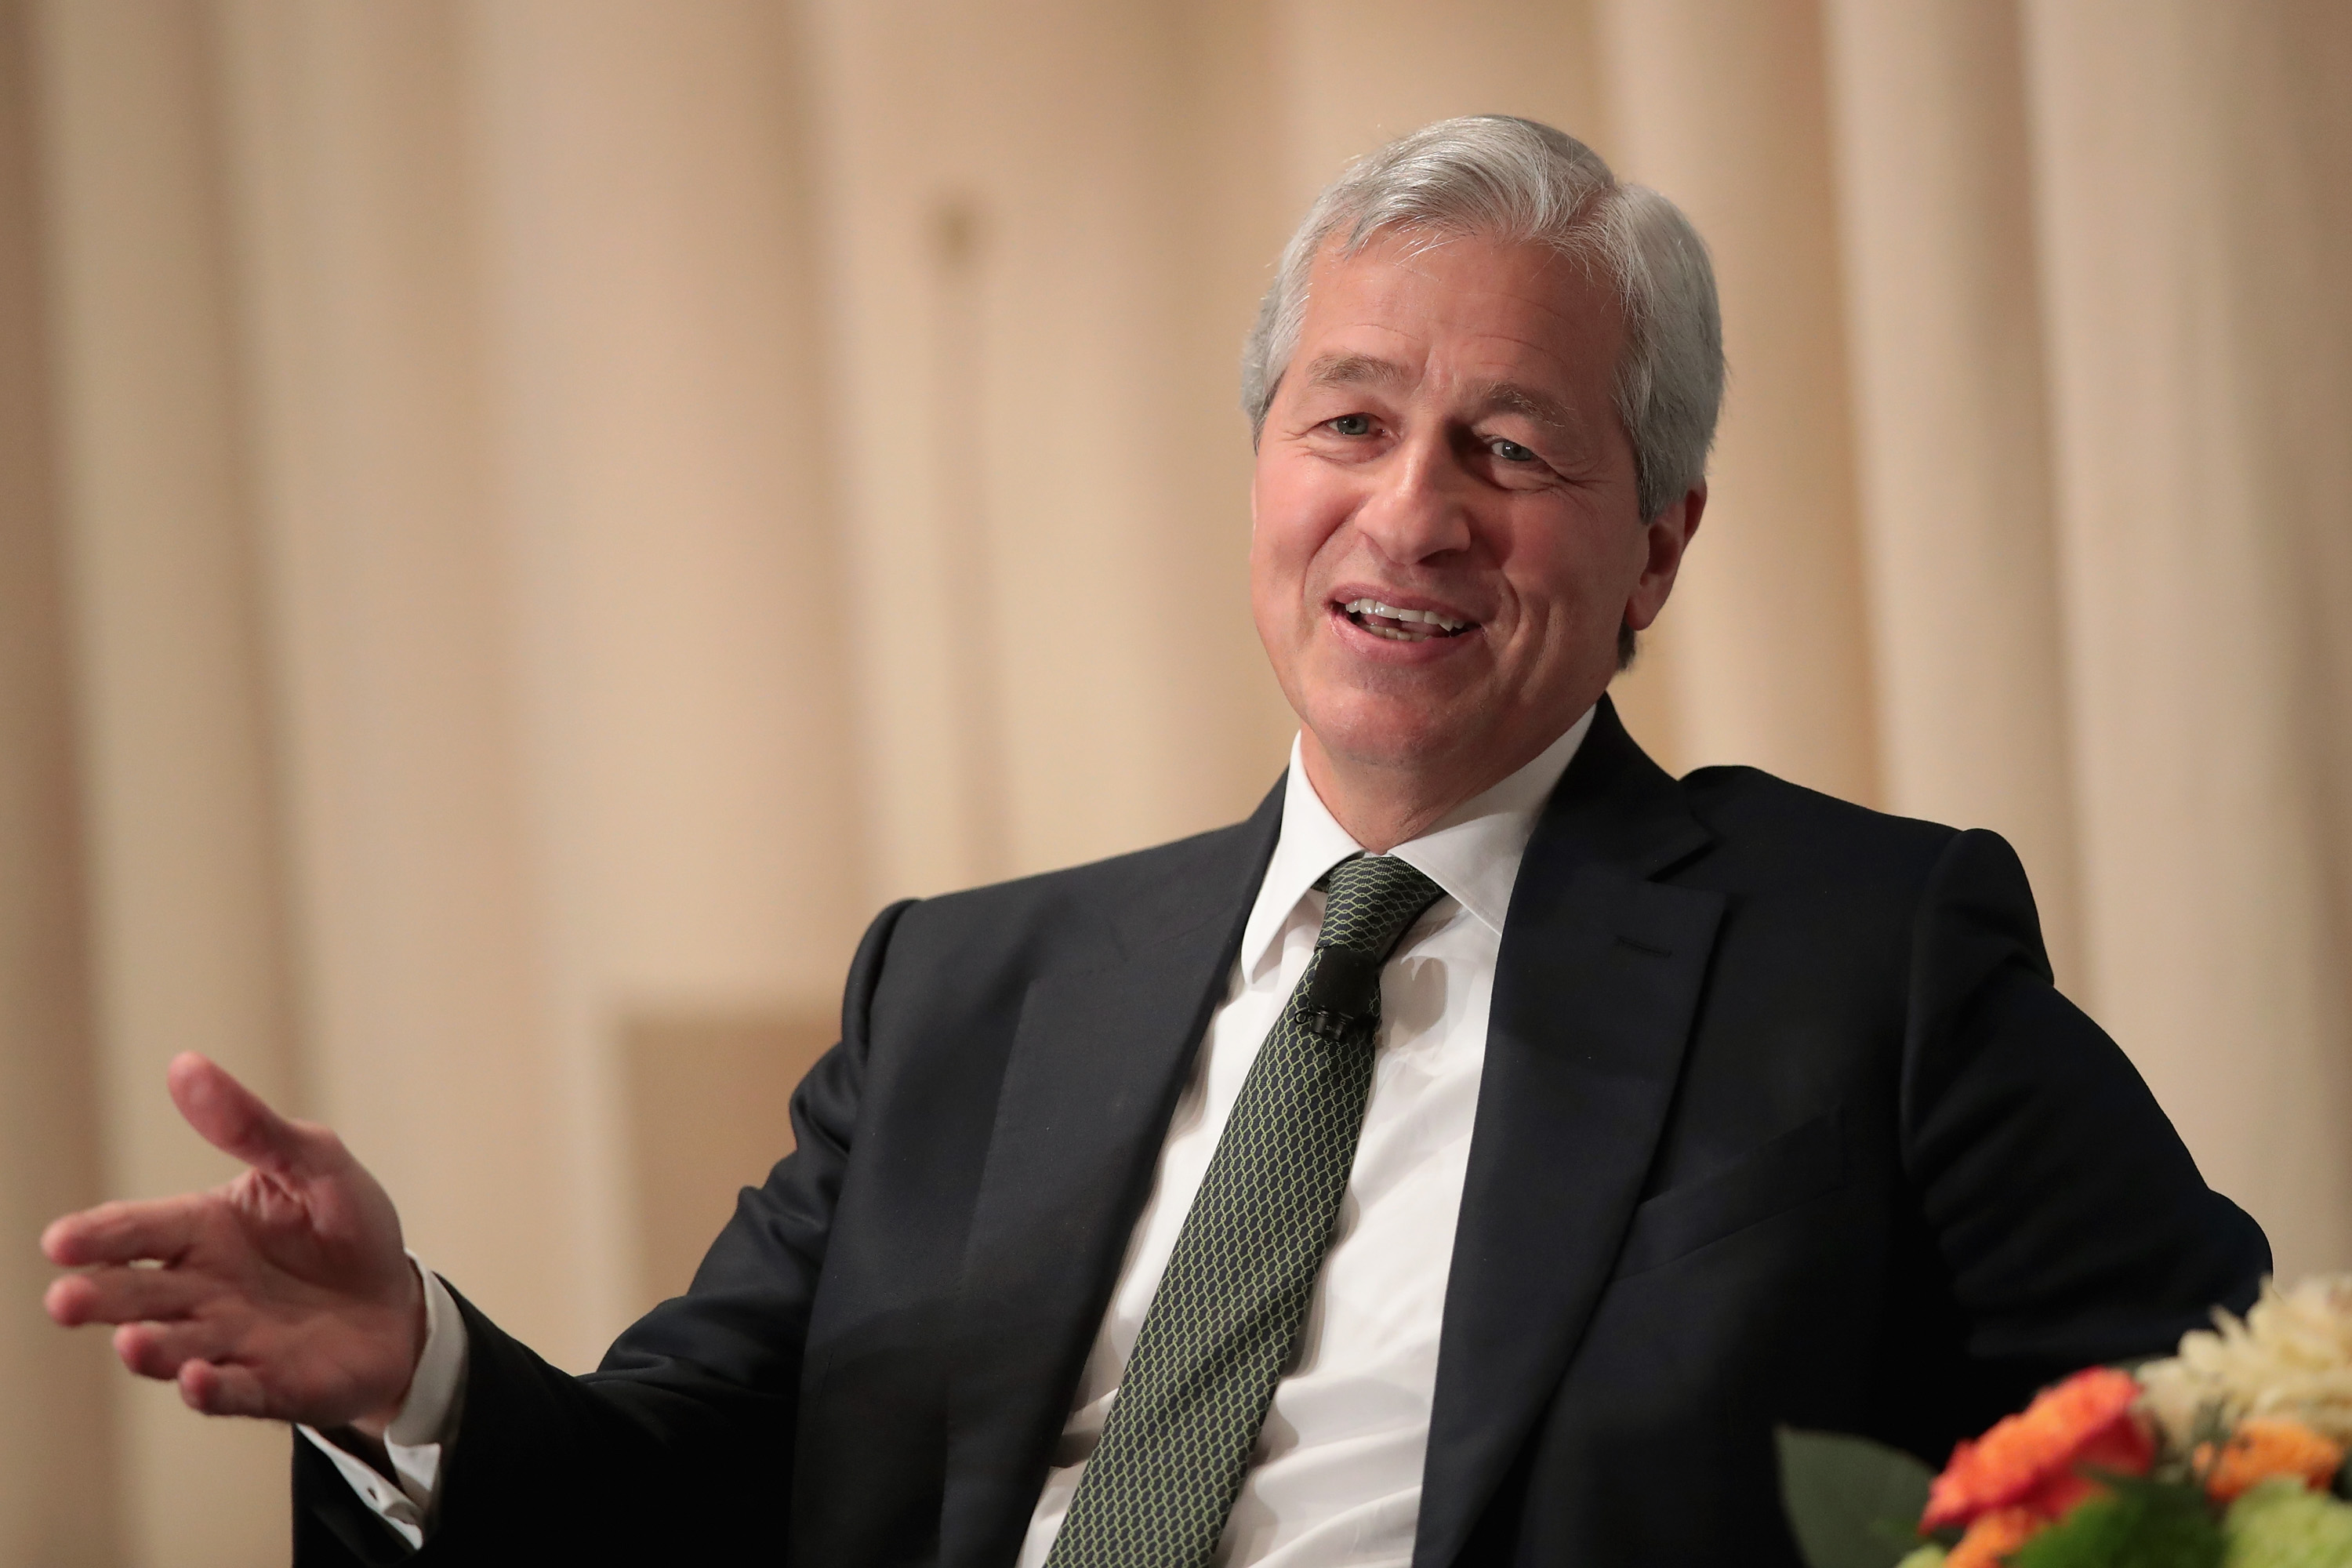 Jamie Dimon, Chairman and CEO of JPMorgan Chase &amp; Co, fields questions from Mellody Hobson, president of Ariel Investments, during a luncheon hosted by The Economic Club of Chicago on November 22, 2017 in Chicago, Illinois. (Scott Olson&mdash;Getty Images)